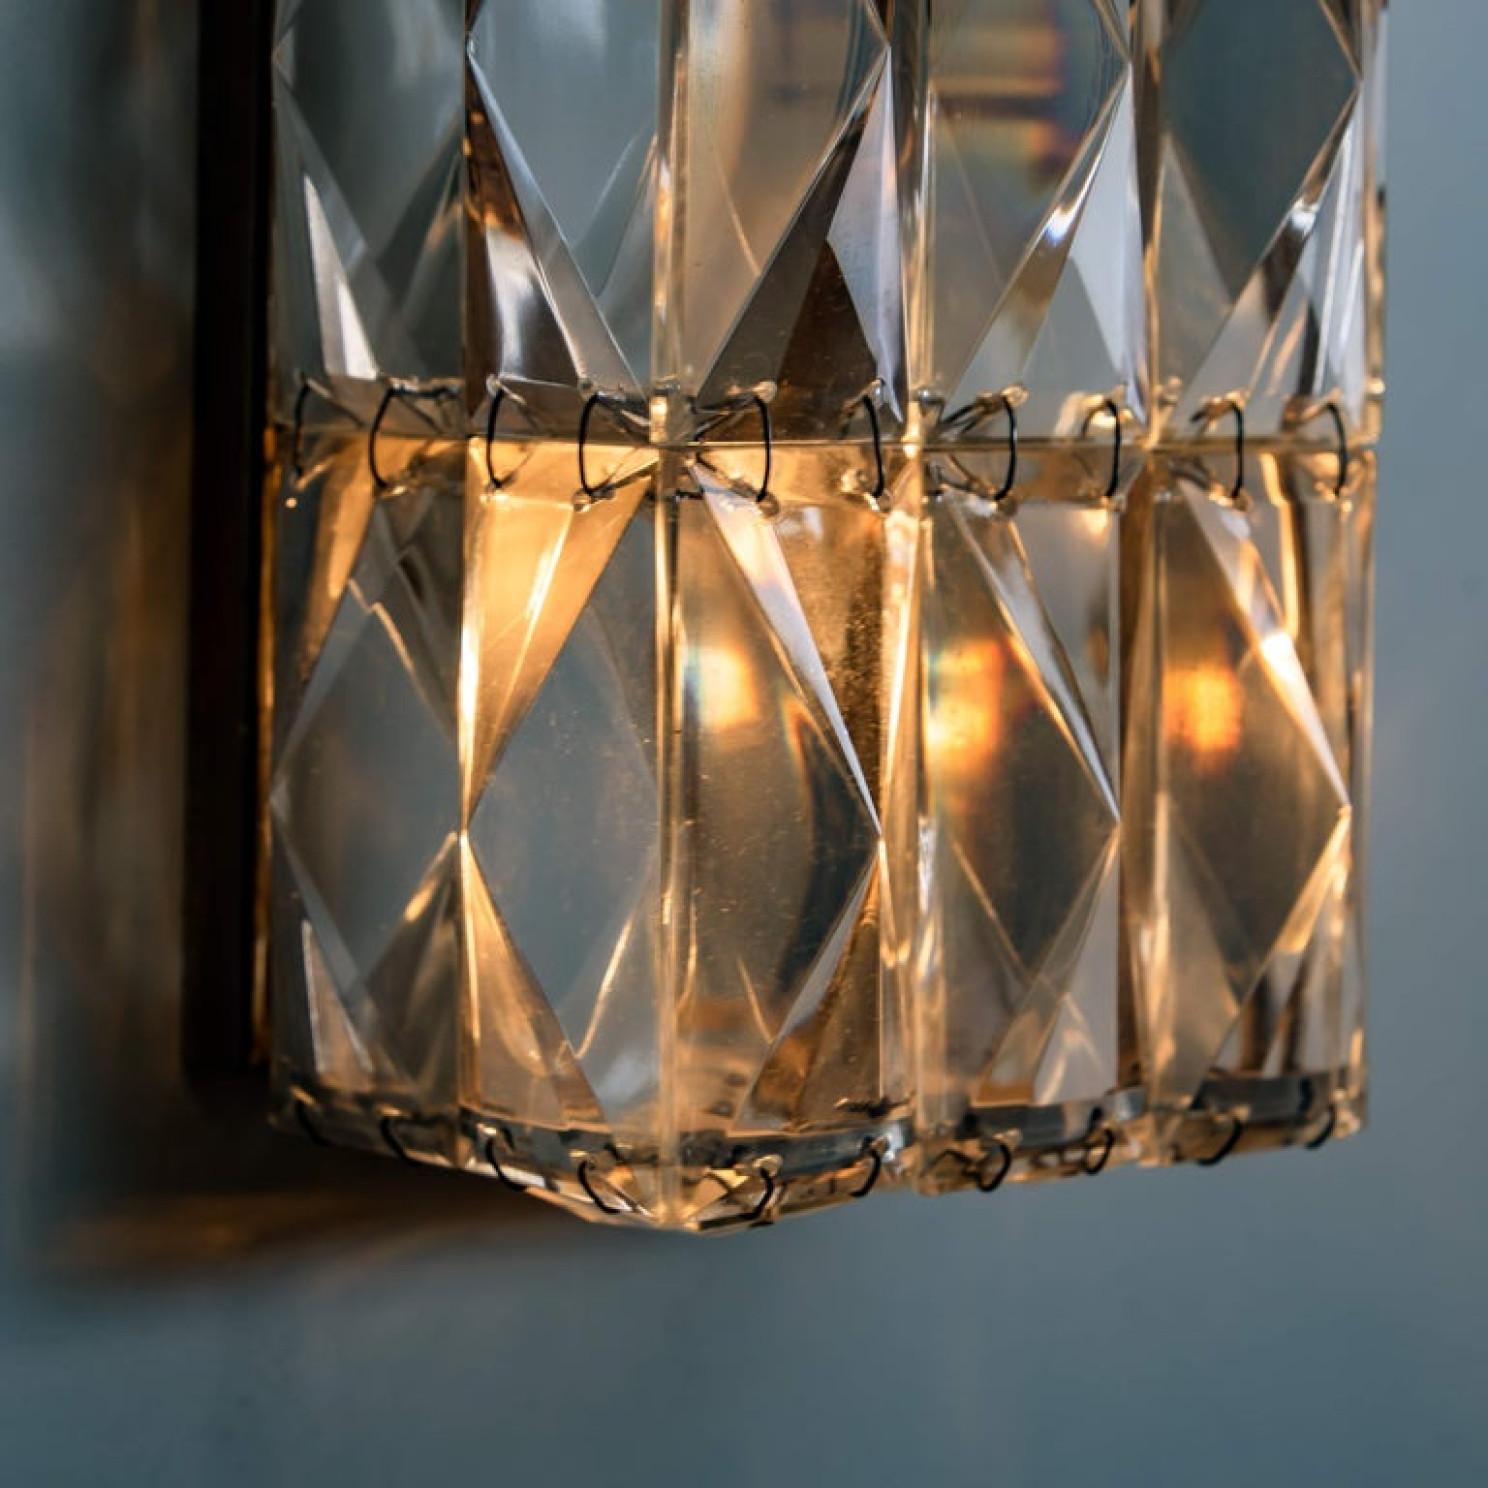 Pair of Palwa Wall Light Fixtures, Chrome-Plated Crystal Glass, 1970 For Sale 3